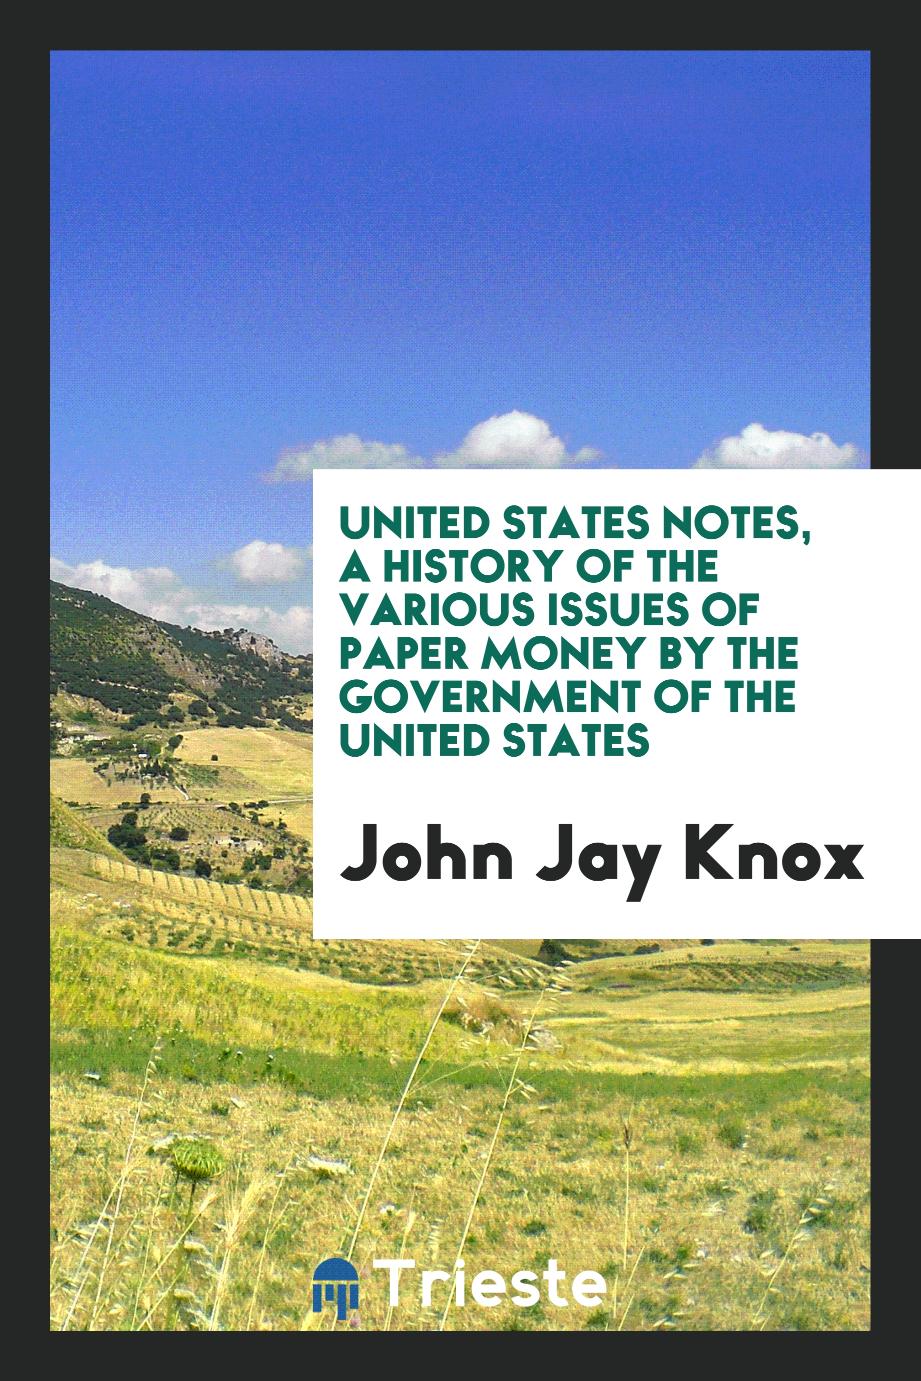 United States notes, a history of the various issues of paper money by the government of the United States